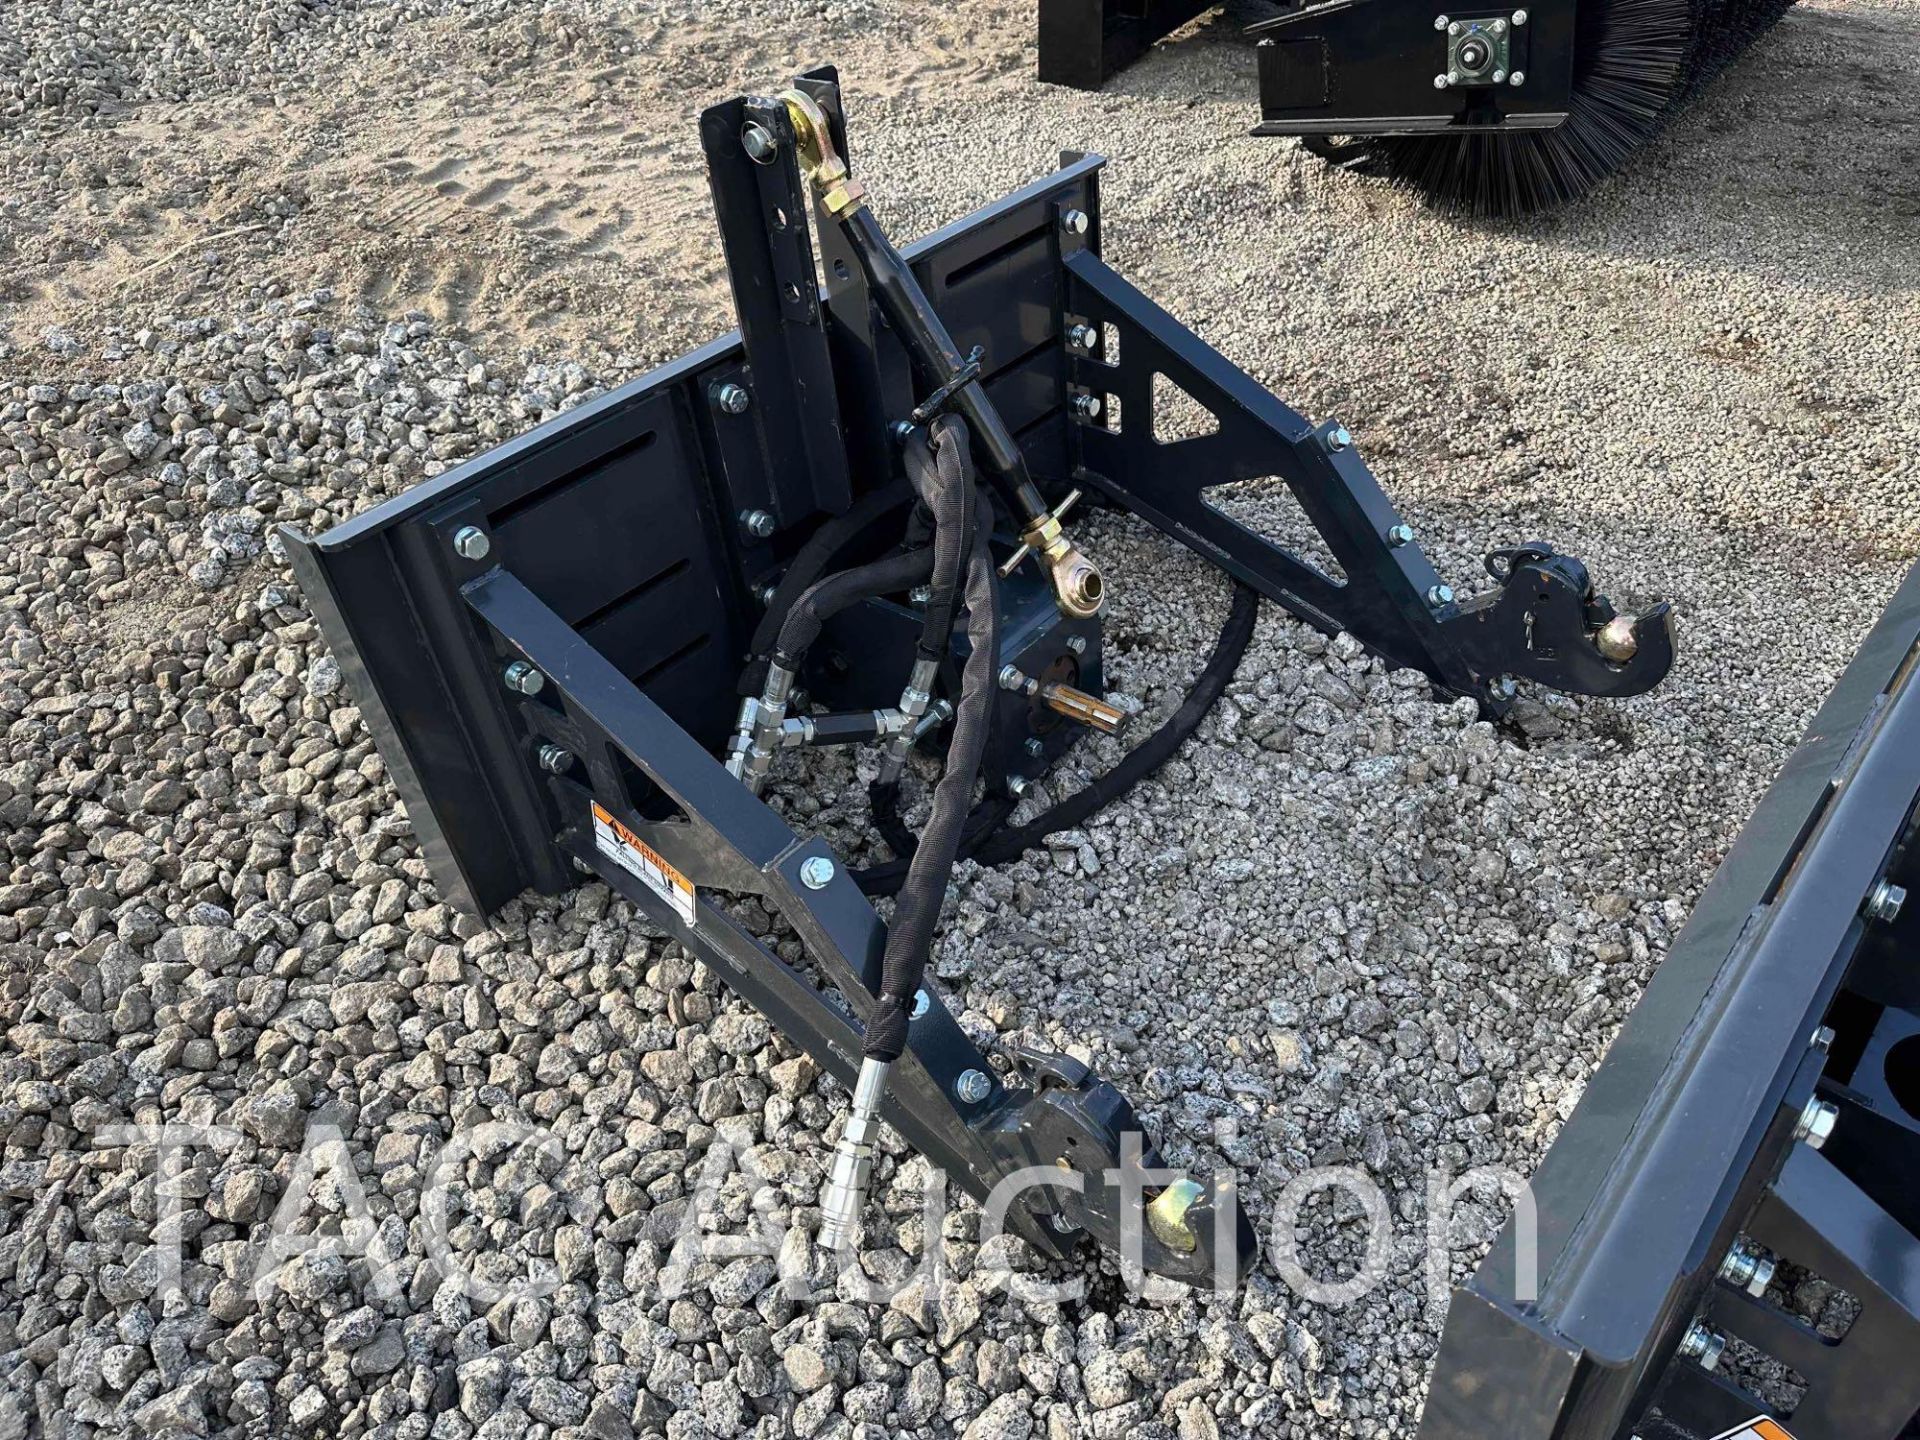 New 2023 Wolverine Skid Steer 3 Point Hitch Adapter - Image 2 of 5